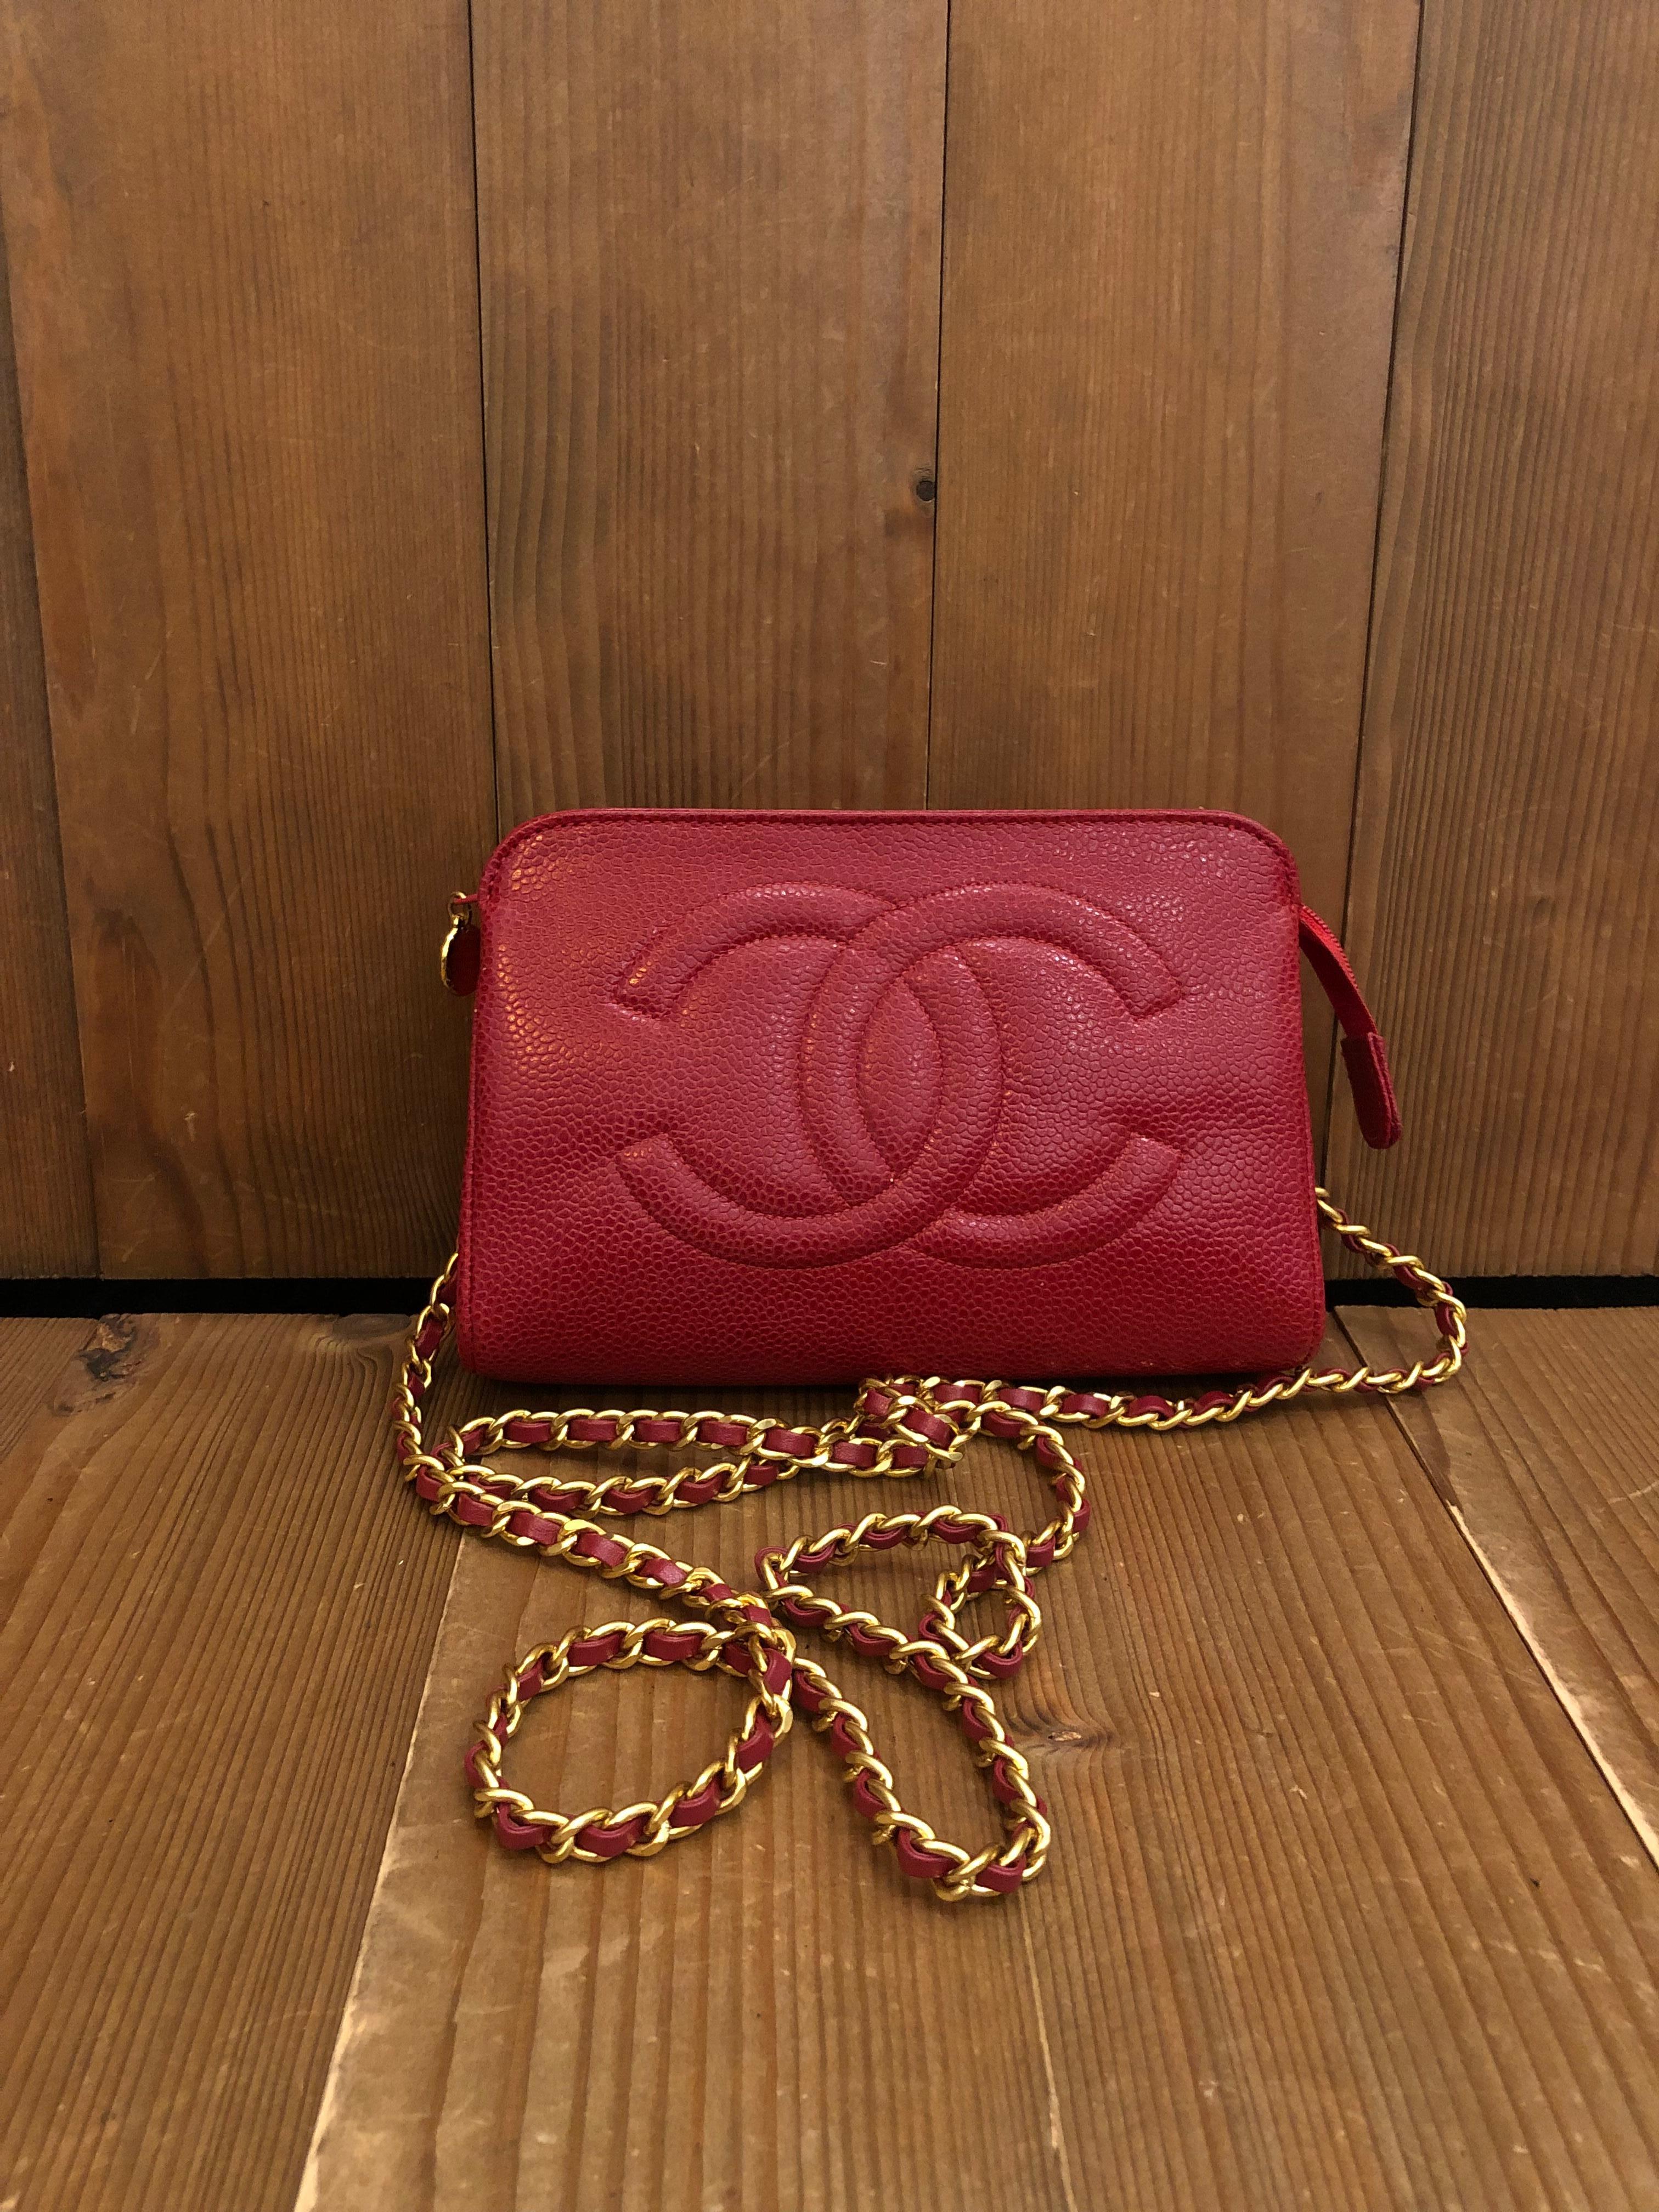 This 1990s CHANEL pouch bag is crafted of caviar leather in red. Top zipper closure opens to a new interior in beige. Made in France. Holo stickier removed in the re-lining process. Measures approximately 7 x 4 x 2 inches. Third party eyelets are